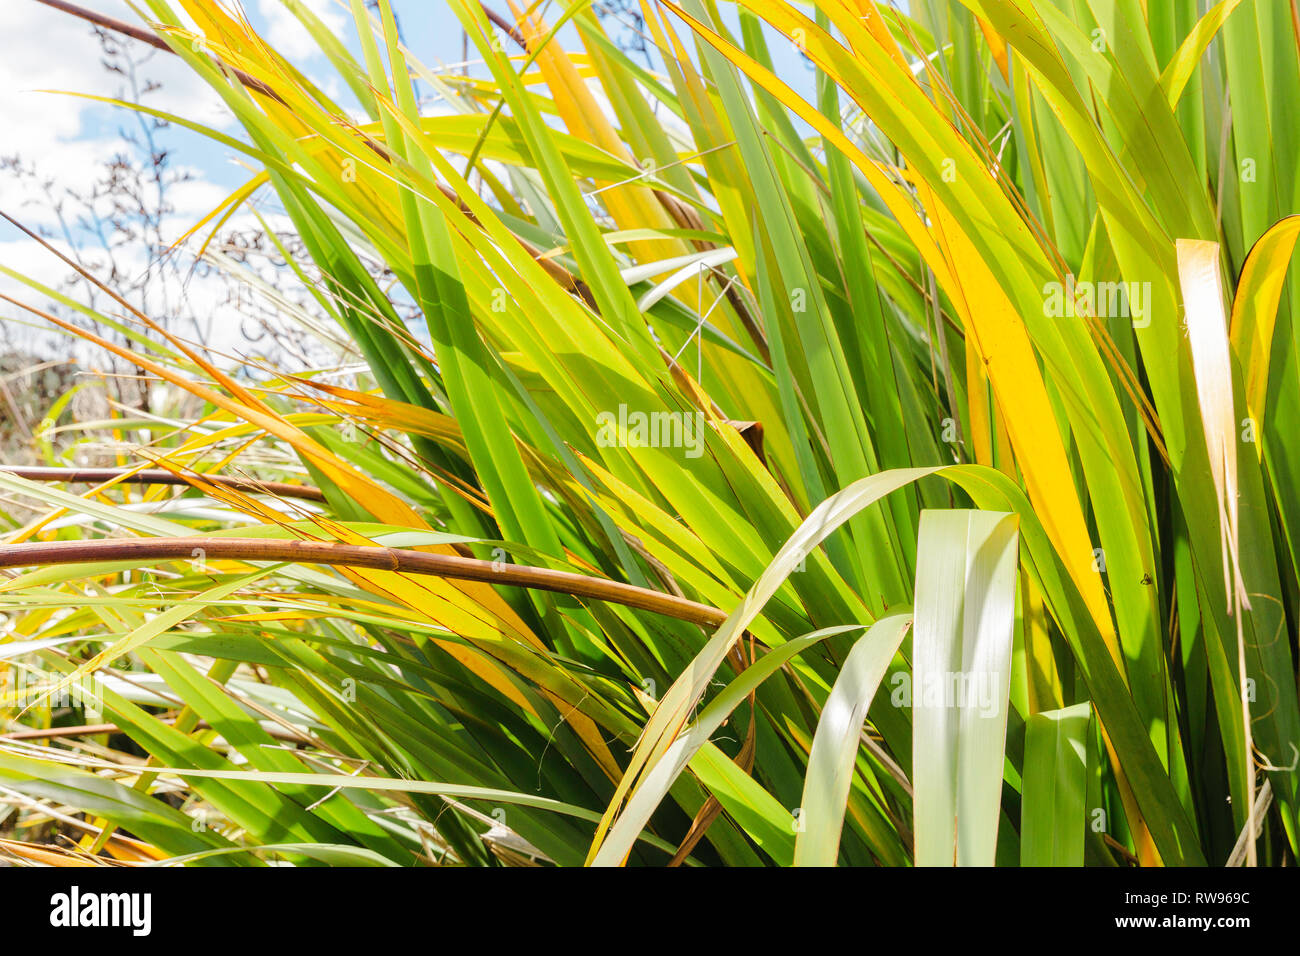 Bright green and yellow flax plant in NZ. Stock Photo